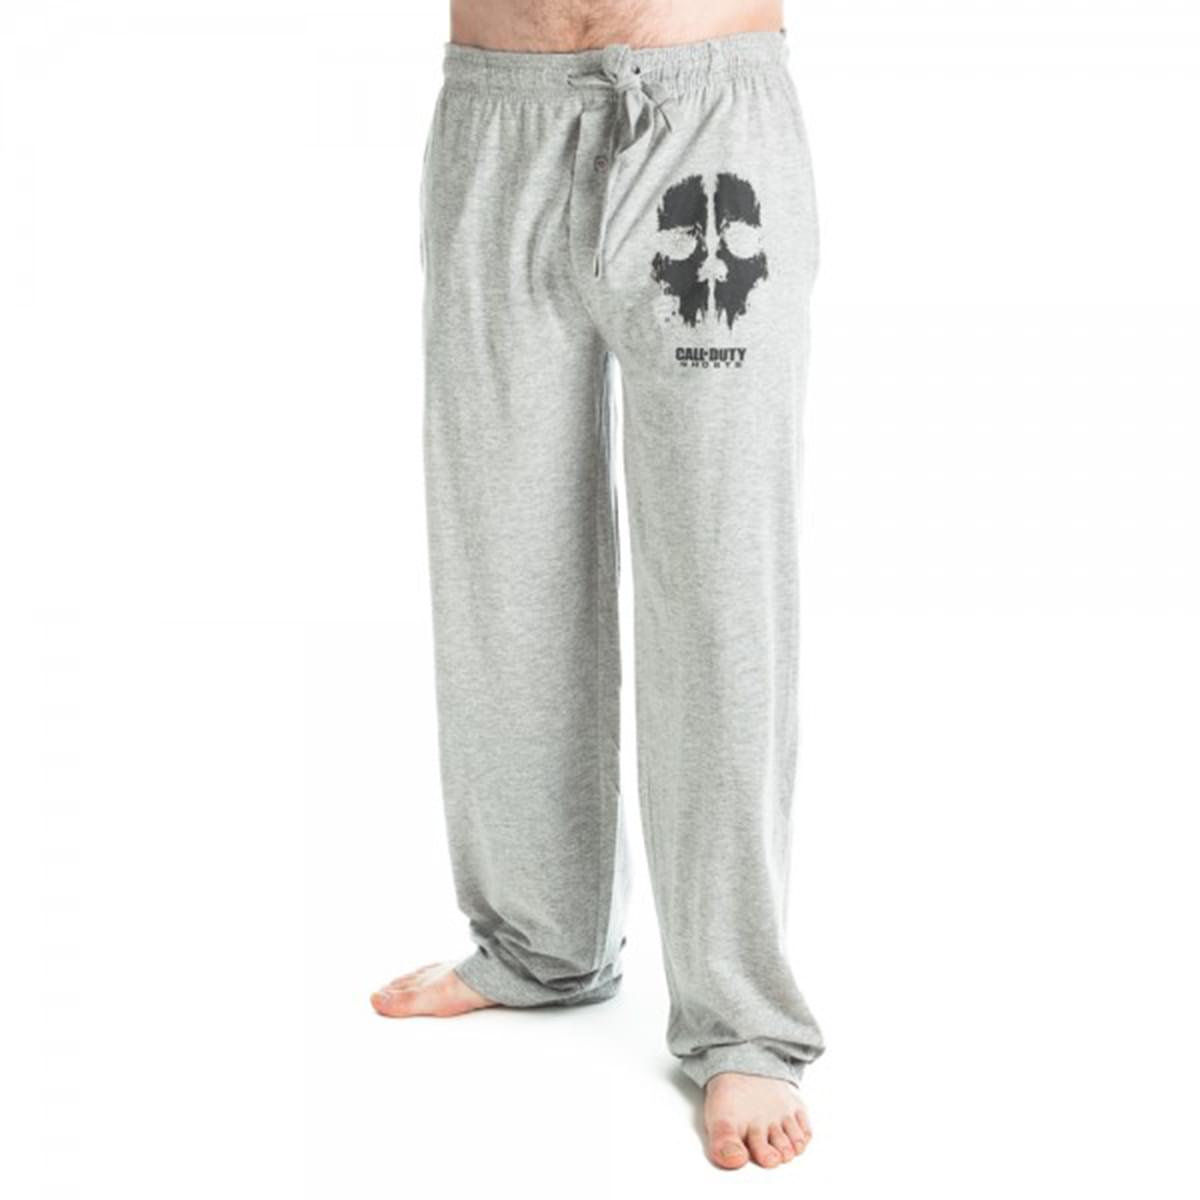 Call of Duty Ghost Logo Adult Men's Lounge Pants